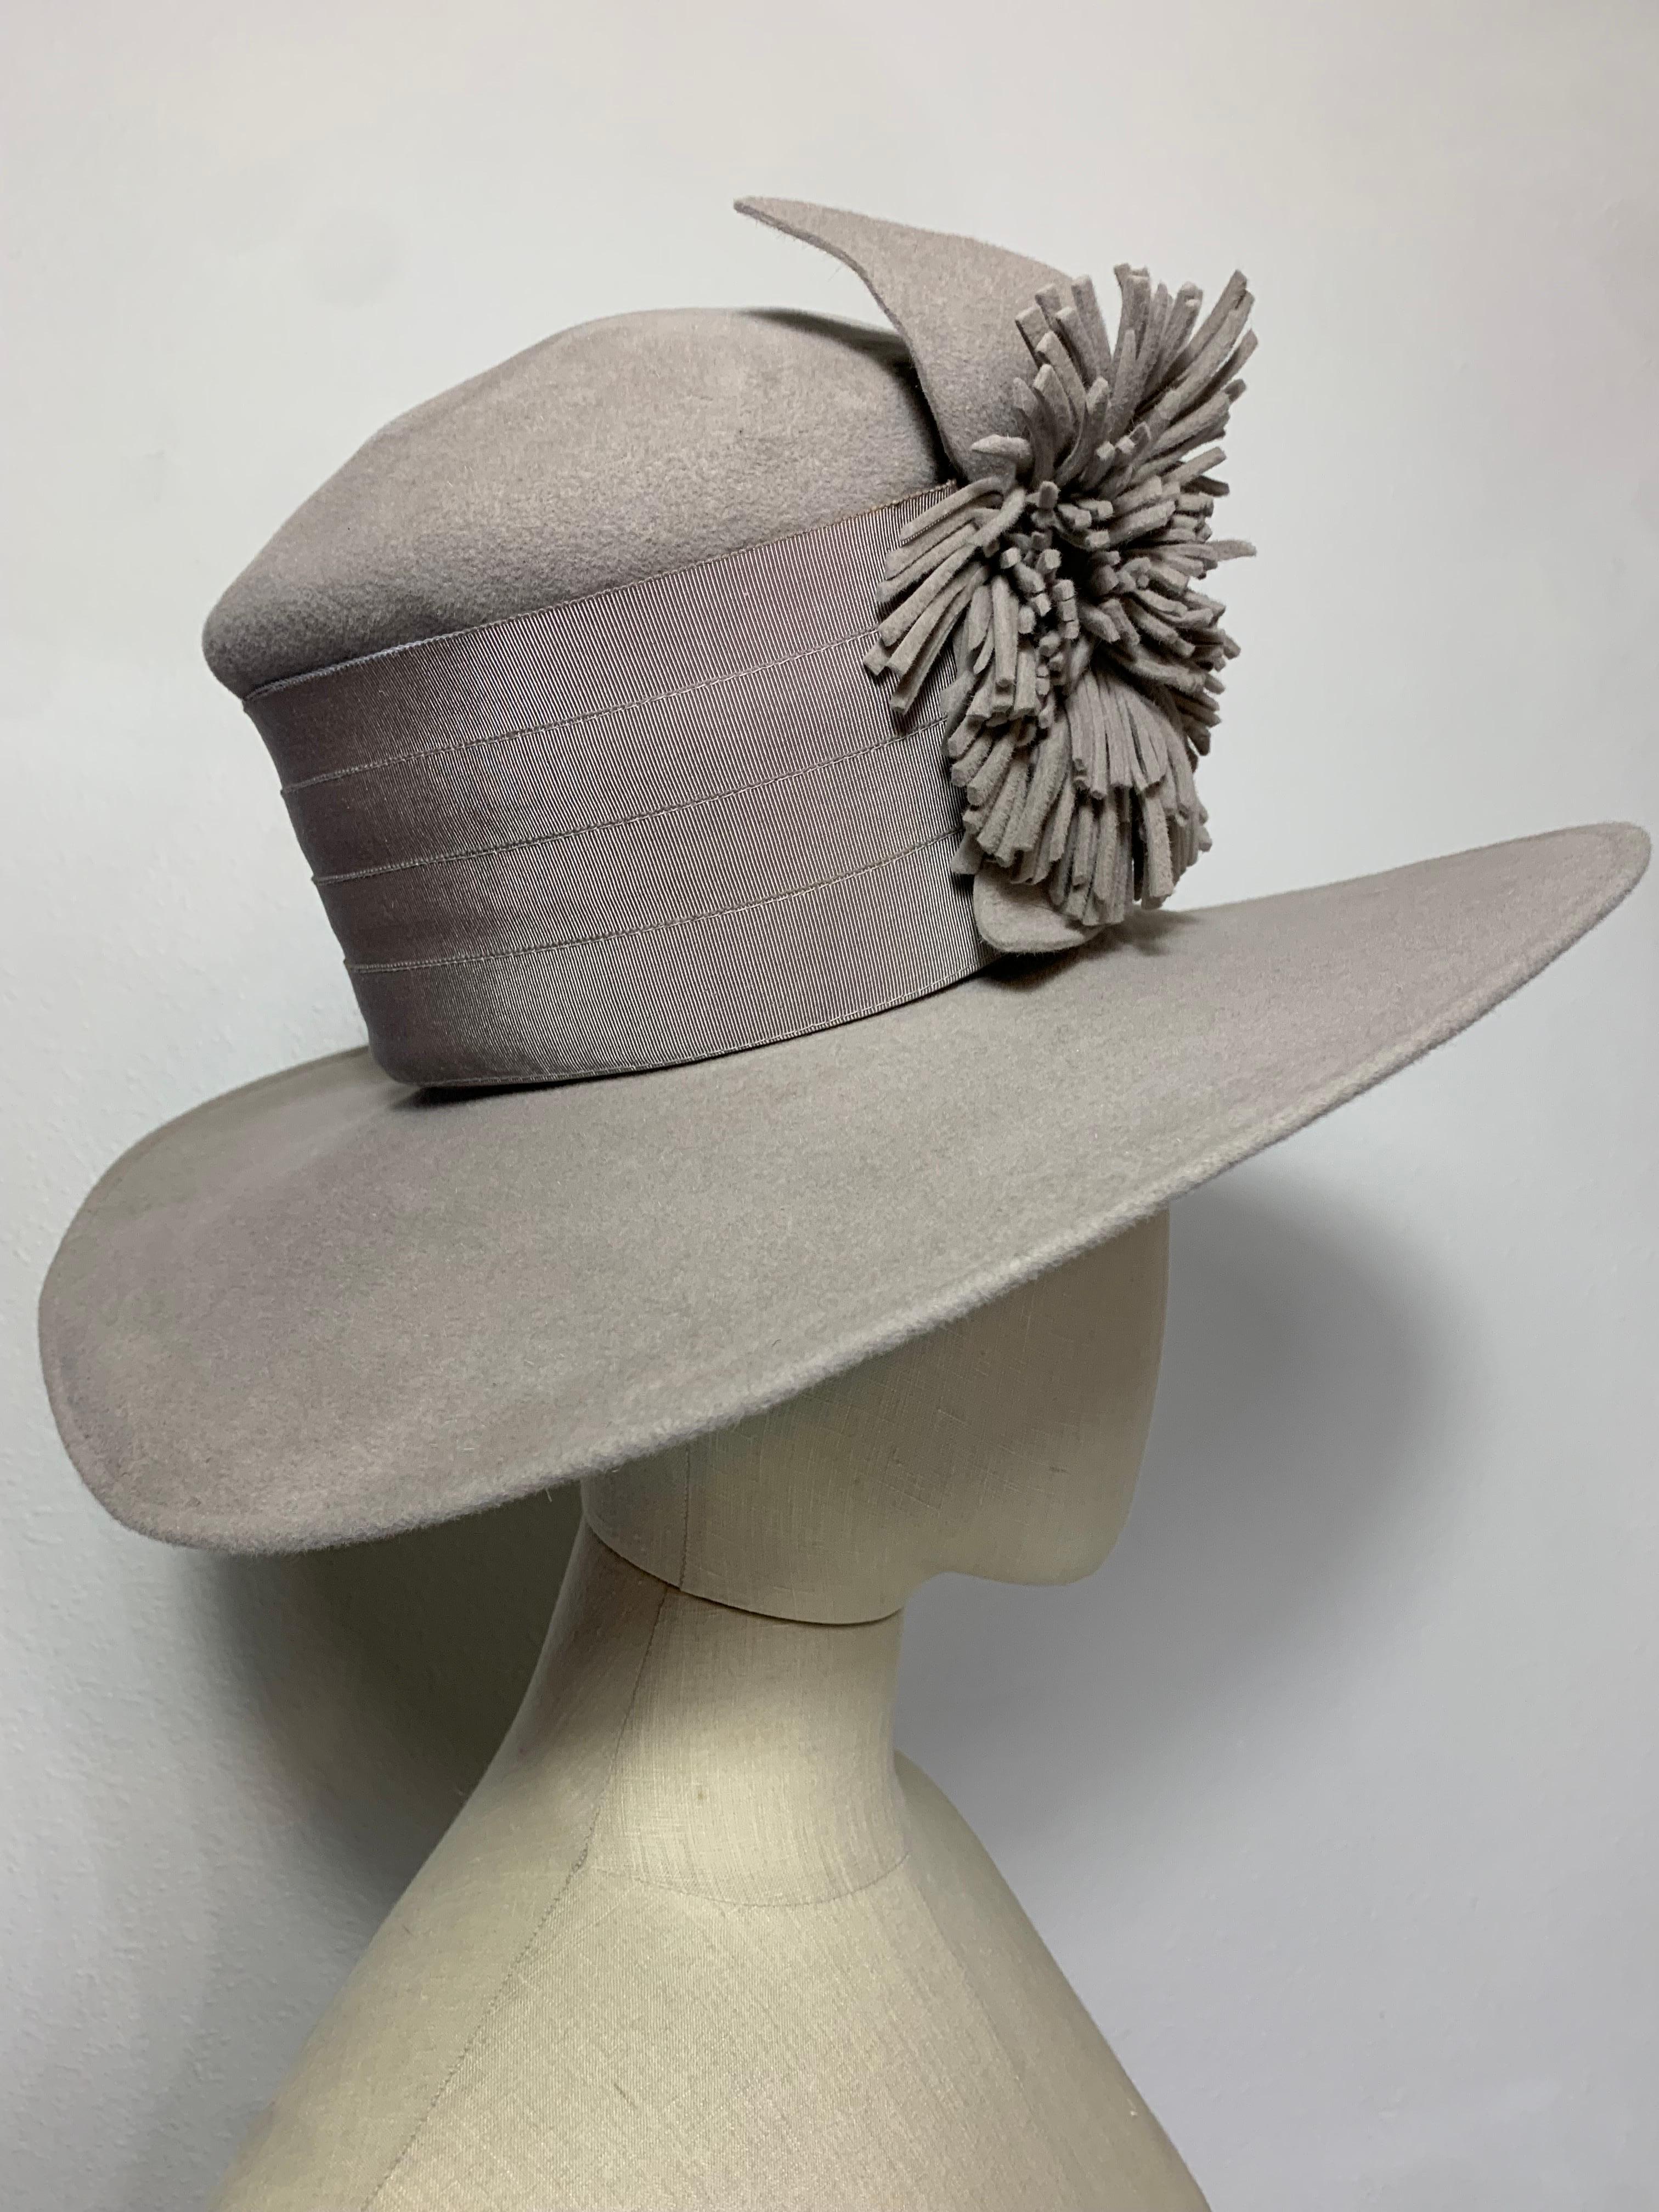 Maison Michel Dove Grey Felt High Top Hat w Matching Flower and Grosgrain Band In Good Condition For Sale In Gresham, OR